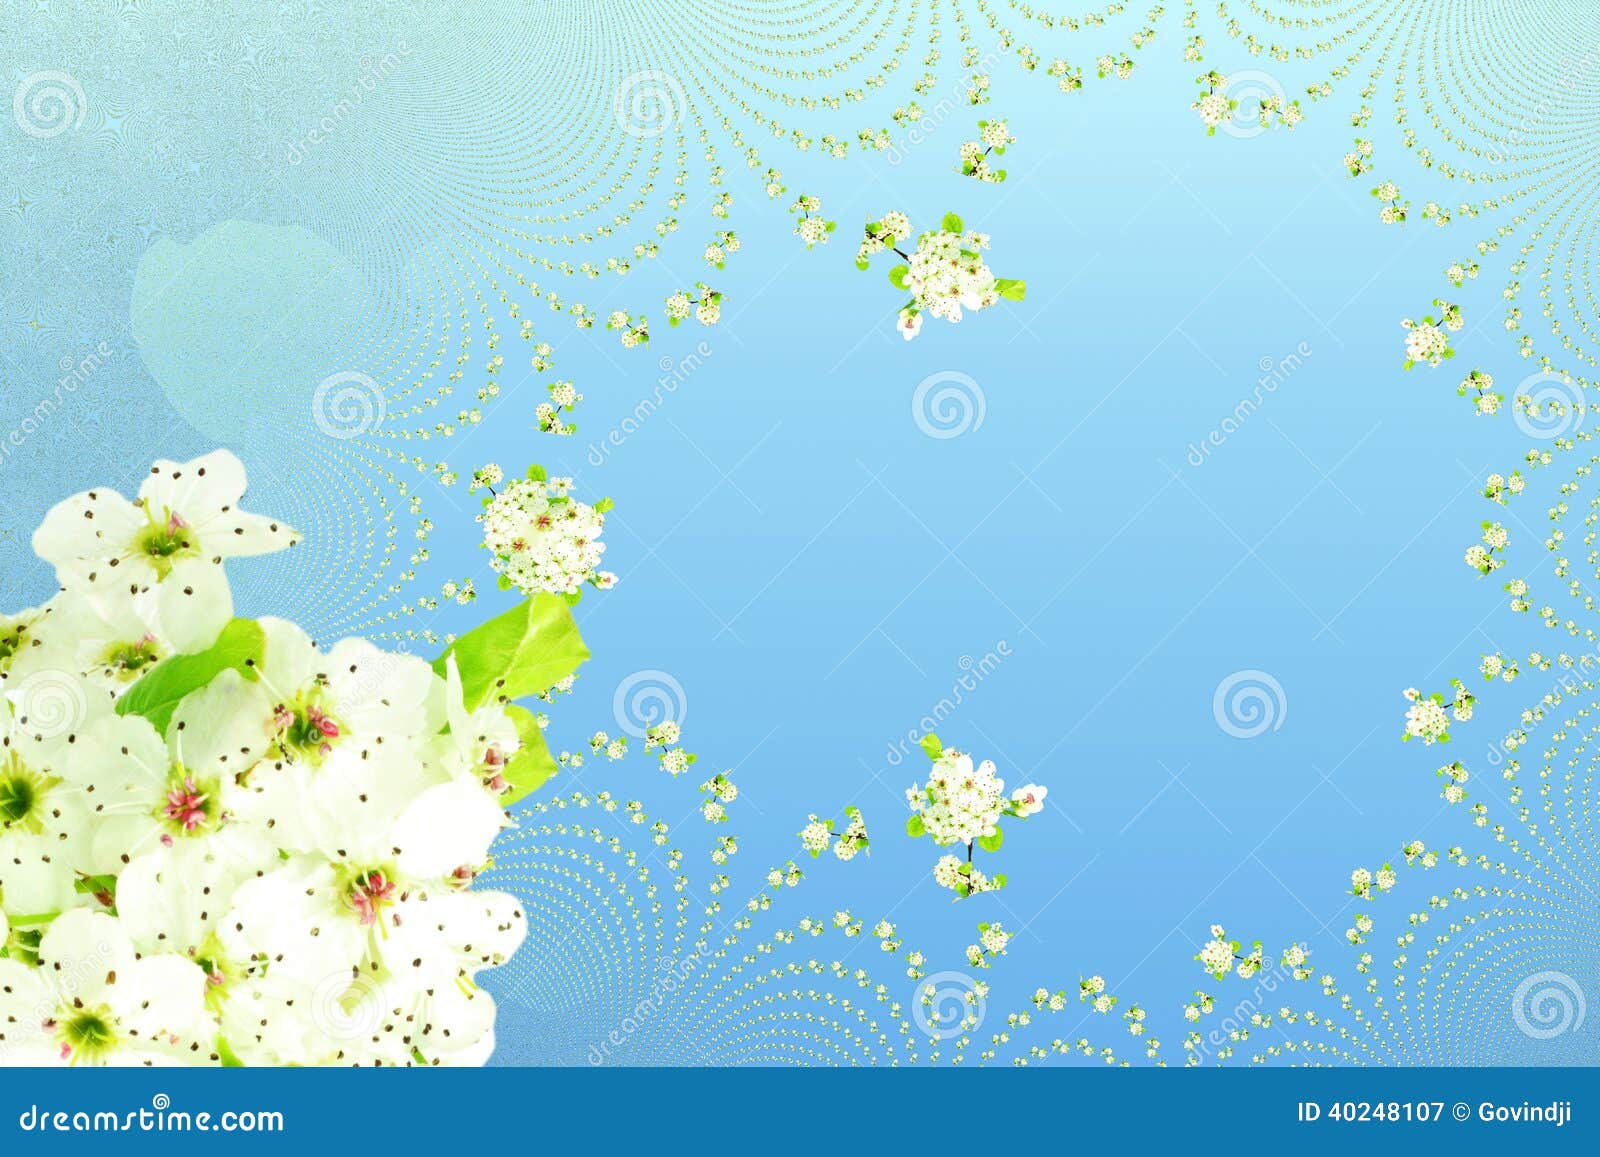 White Spring Flower Texture Sky Blue Background Stock Illustration -  Illustration of sketch, abstract: 40248107